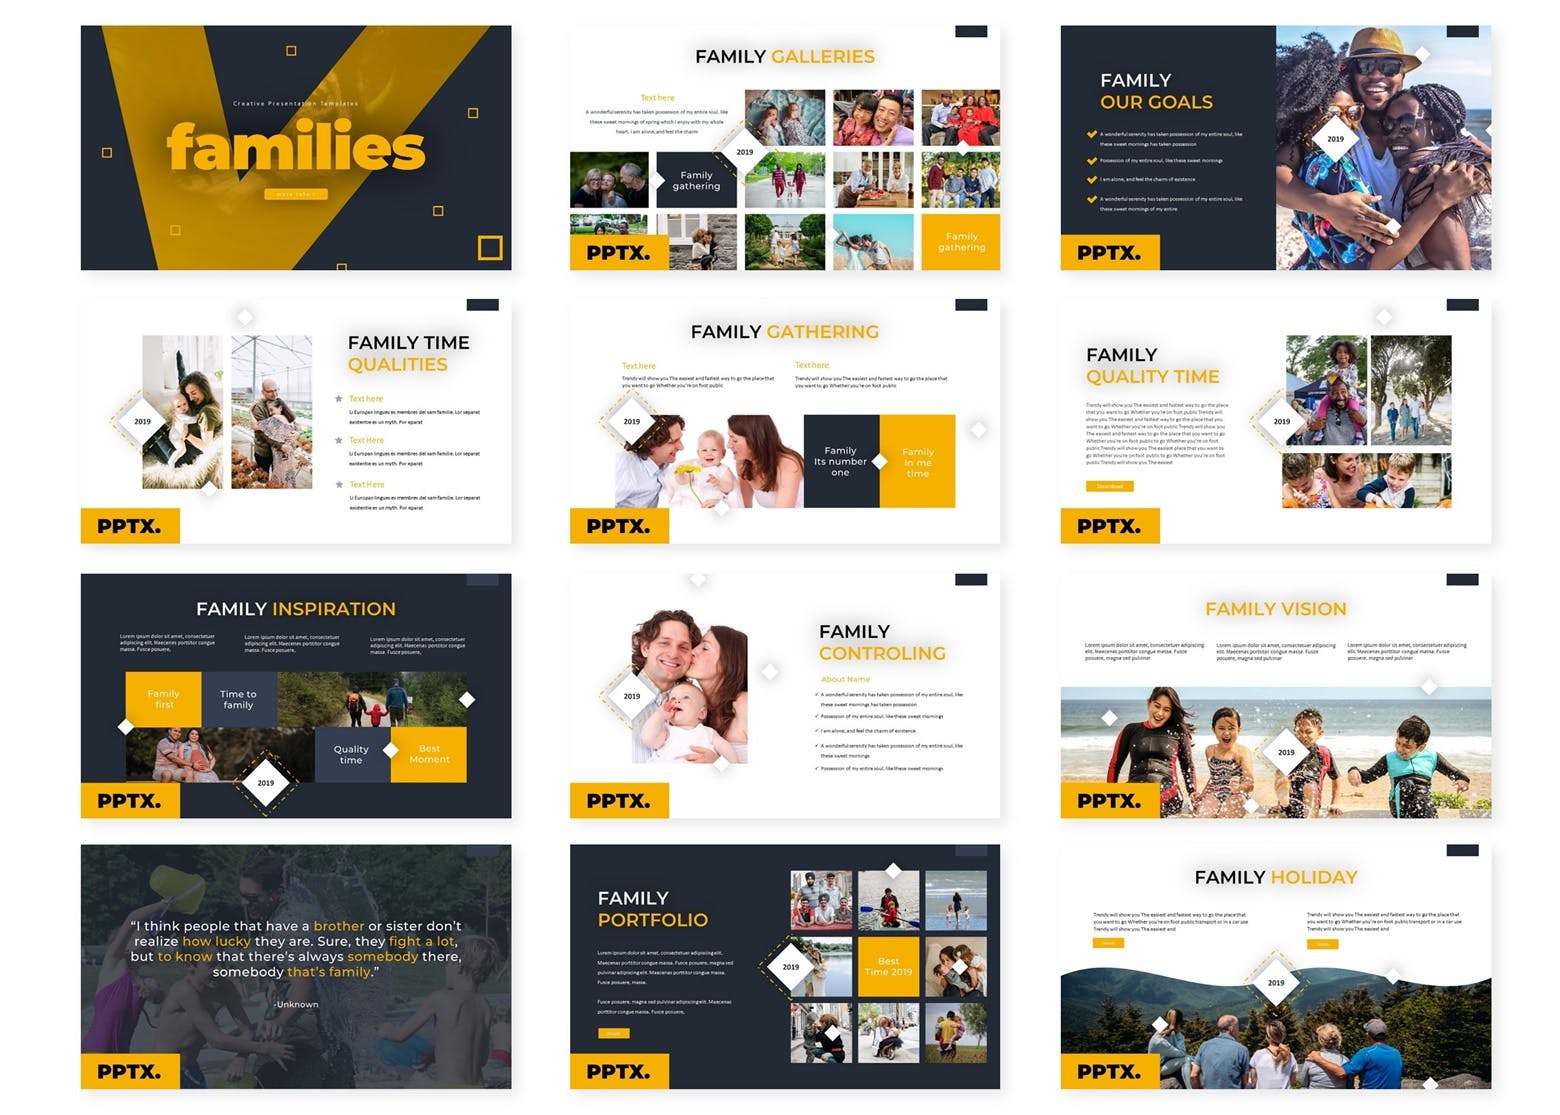 Great template in yellow and dark grey colors.